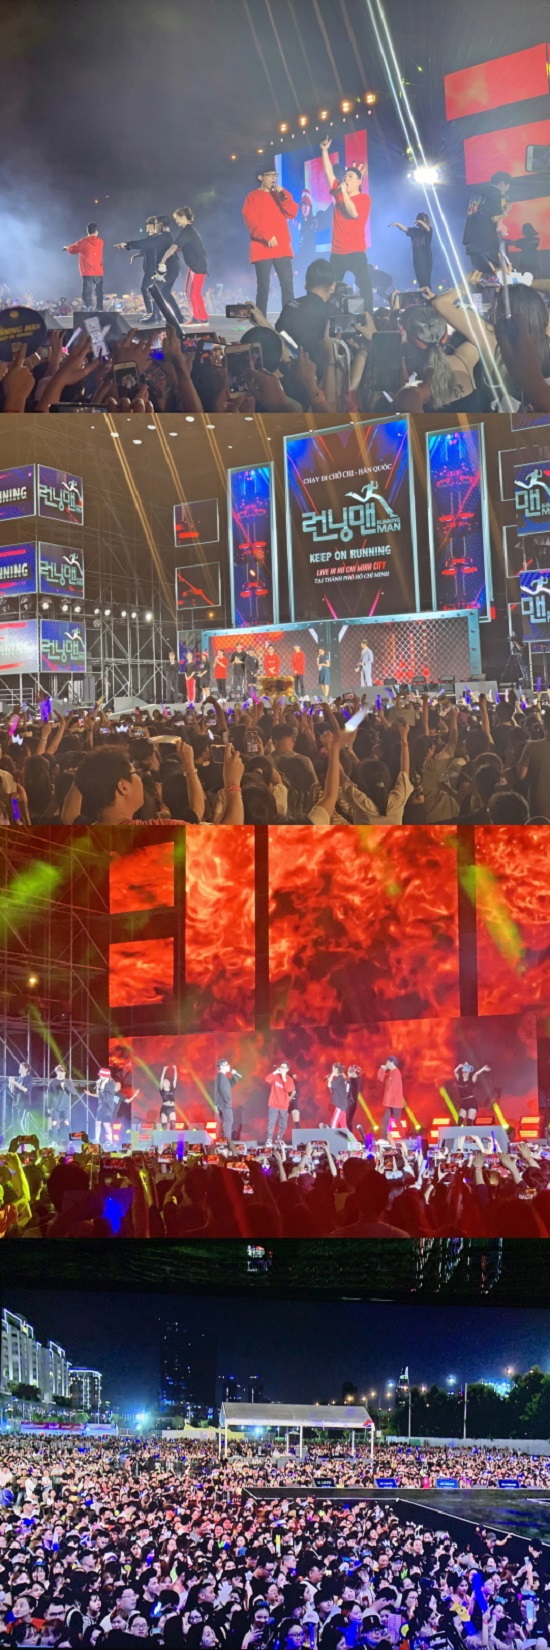 <p>The last 1 days in Vietnam in Ho Chi Minh conducted SBS ‘Running Man’ fan meeting performances are approximately 1 million fans of all the ‘Running Man’of the global proved popular.</p><p>This Love Without Love (Live at Summer Vacation/08 performances in Ho Chi Minh outdoor venues in the entire analysis is as progress was Southeast Asias first 1 million of the audience gathered, and the ticket Open on the first day 9 the ceiling of the ticket sales being recorded to the new staff. ALSO SBSs ‘Running Man’ Love Without Love (Live at Summer Vacation/08 events official partners of ‘over medias official YouTube Live channel at the start and at the same time 5 thousand people access to and performances to watch here.</p><p>Performances MC of the year ‘Vietnam edition Running Man’appeared in a recent popular actor and singer in response except words take meaning more. The ceremony is approximately 2 hours and 30 minutes was conducted and, ‘Running Man’ members for a long time stood in the performances that fans are worried and the fans  support and cheers to a hot day despite the interference of the performances unfolded.</p><p>SBS global content Biz team of resources and producer of “next years ‘Running Man 10th anniversary Asia-Love Without Love (Live at Summer Vacation/08 tour’ready, and there are some Vietnam fans sending their great power was. My boys Love Without Love (Live at Summer Vacation/08 a tour of the tow truck Act standards seems to be,”he said. ‘2019 Running Man overseas Love Without Love (Live at Summer Vacation/08 tour’to Hong Kong, Jakarta and in Ho Chi Minh to finally stop down.</p><p>Meanwhile, ‘Running Man’is from Uzbekistan of popularity based on the ‘Vietnam edition Running Man Season 2’ launch to prepare for the ’Running Man’of the global popularity is expected to continue.</p>